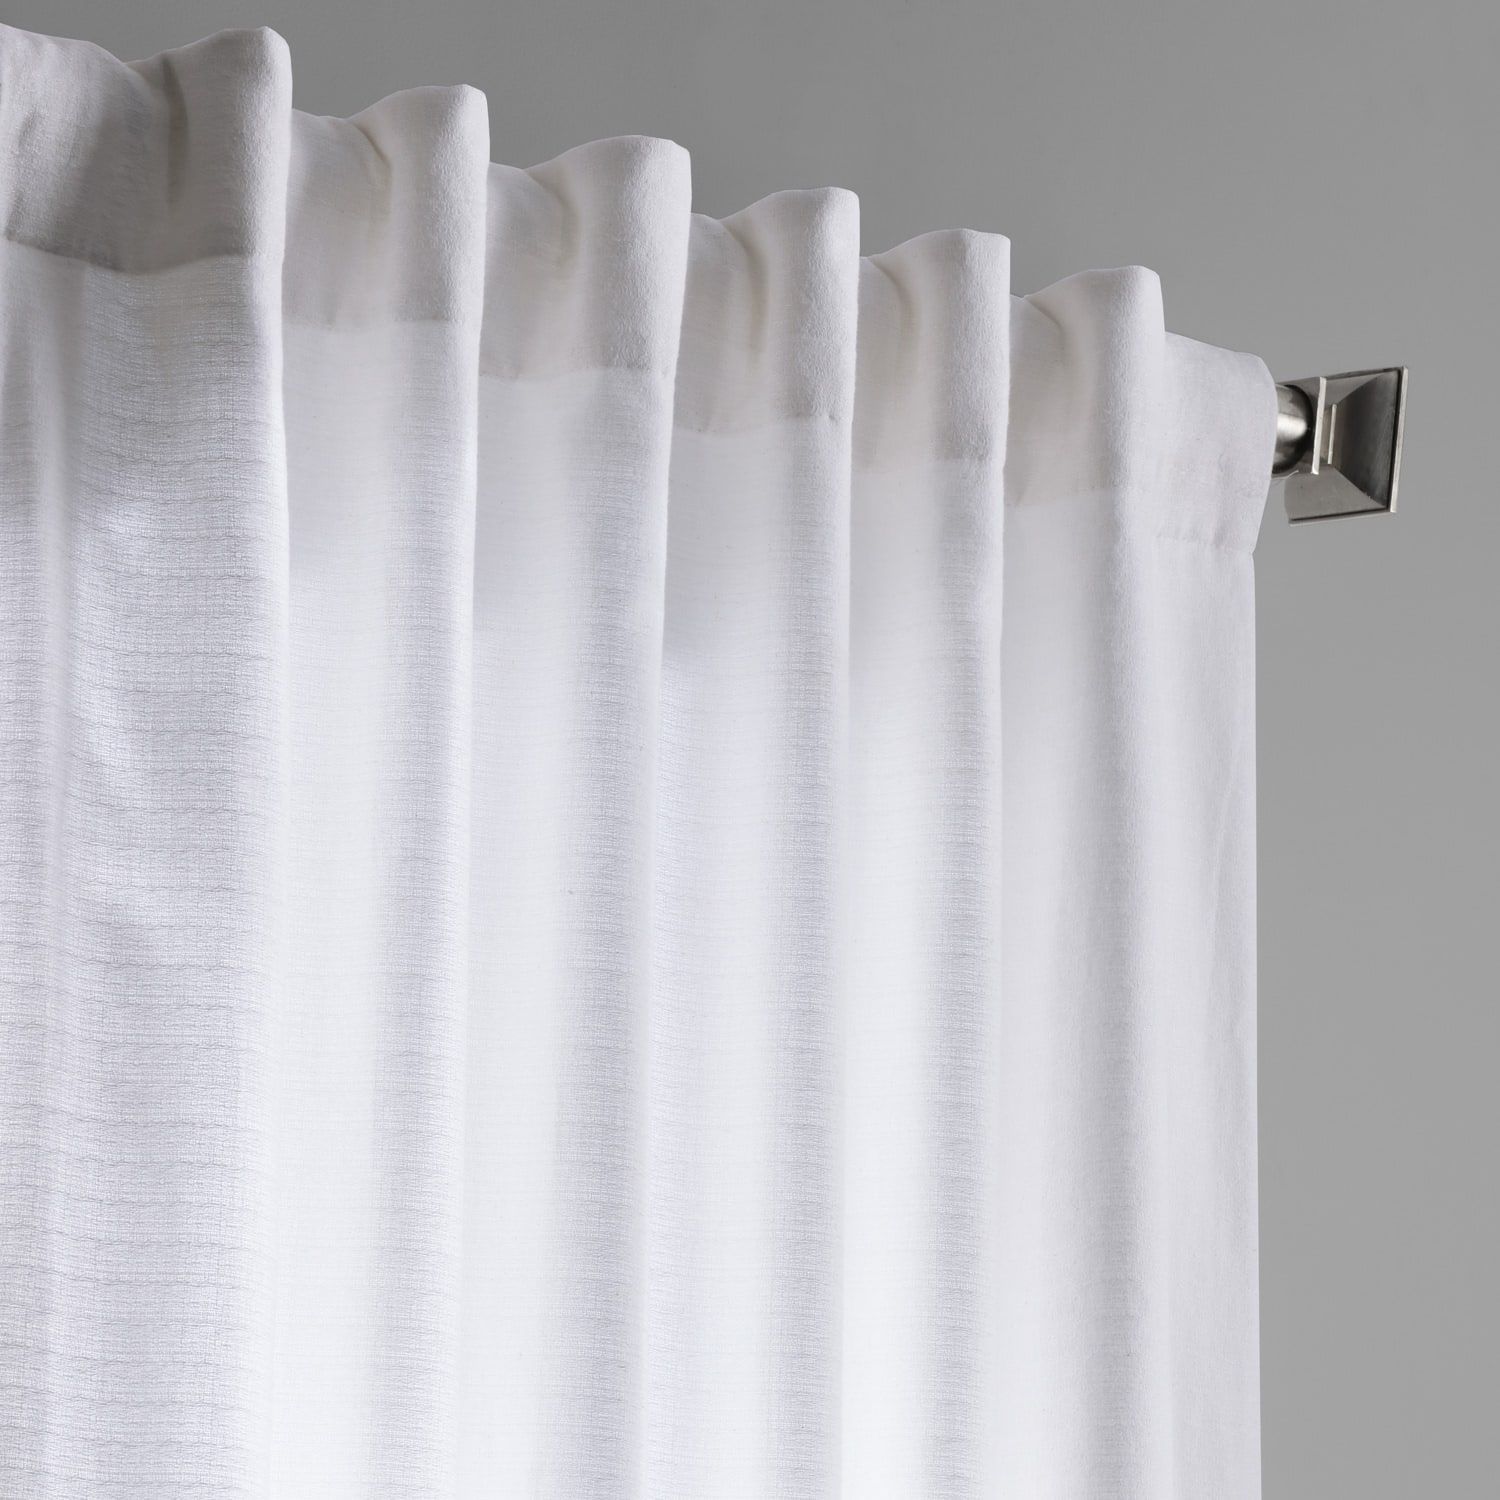 Ultra White Bark Weave Solid Cotton Curtain Pertaining To Bark Weave Solid Cotton Curtains (View 11 of 20)